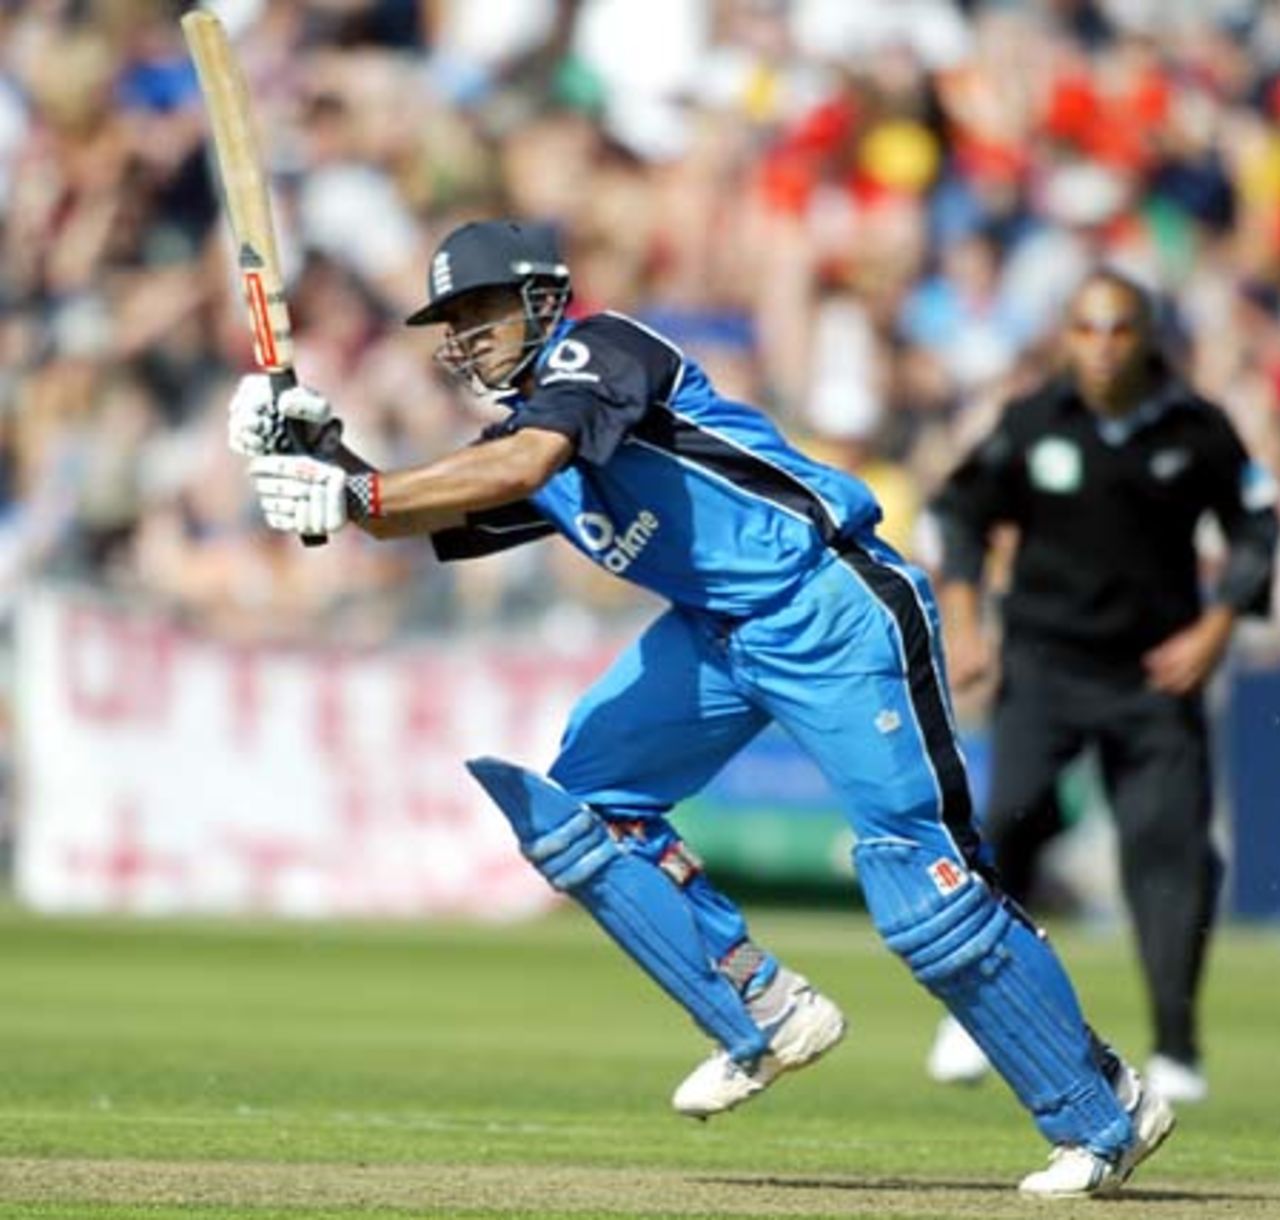 England batsman Owais Shah drives a delivery on the leg side during his innings of 57. 5th ODI: New Zealand v England at Carisbrook, Dunedin, 26 February 2002.